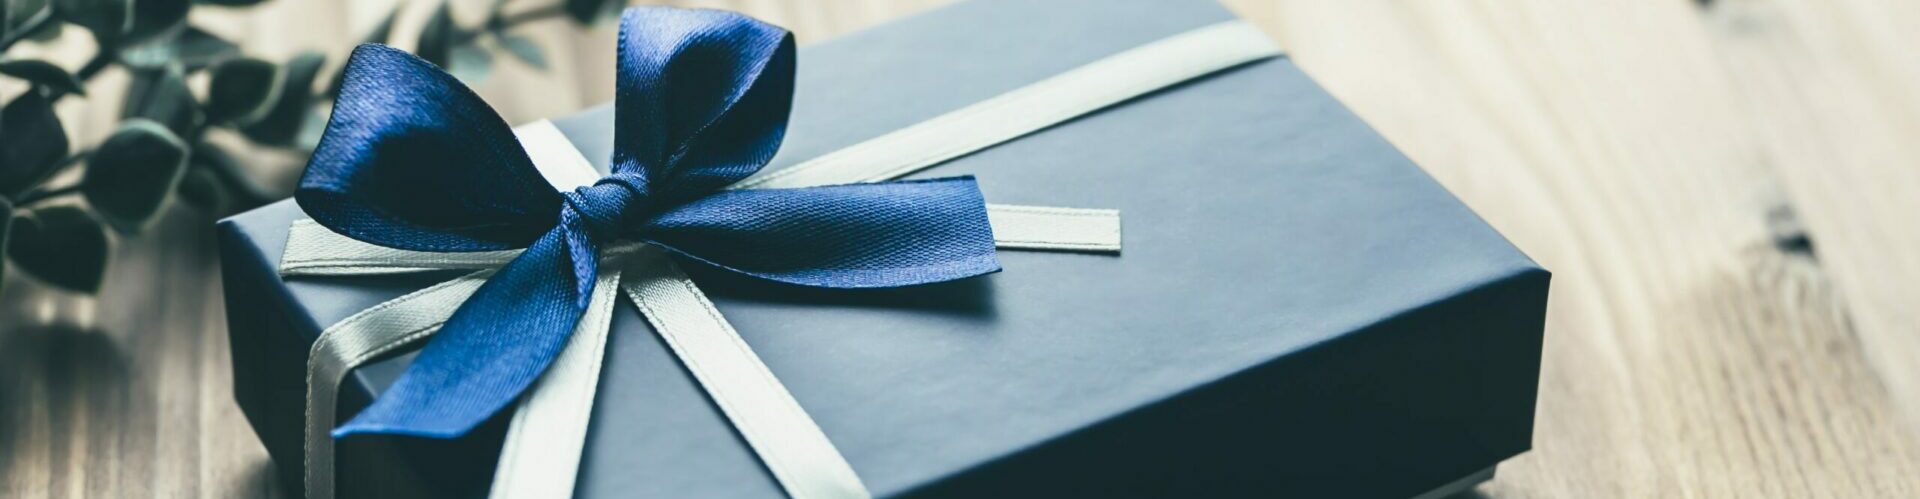 Holiday Ecommerce Strategies for 2022 - blue gift box with blue ribbon on floor